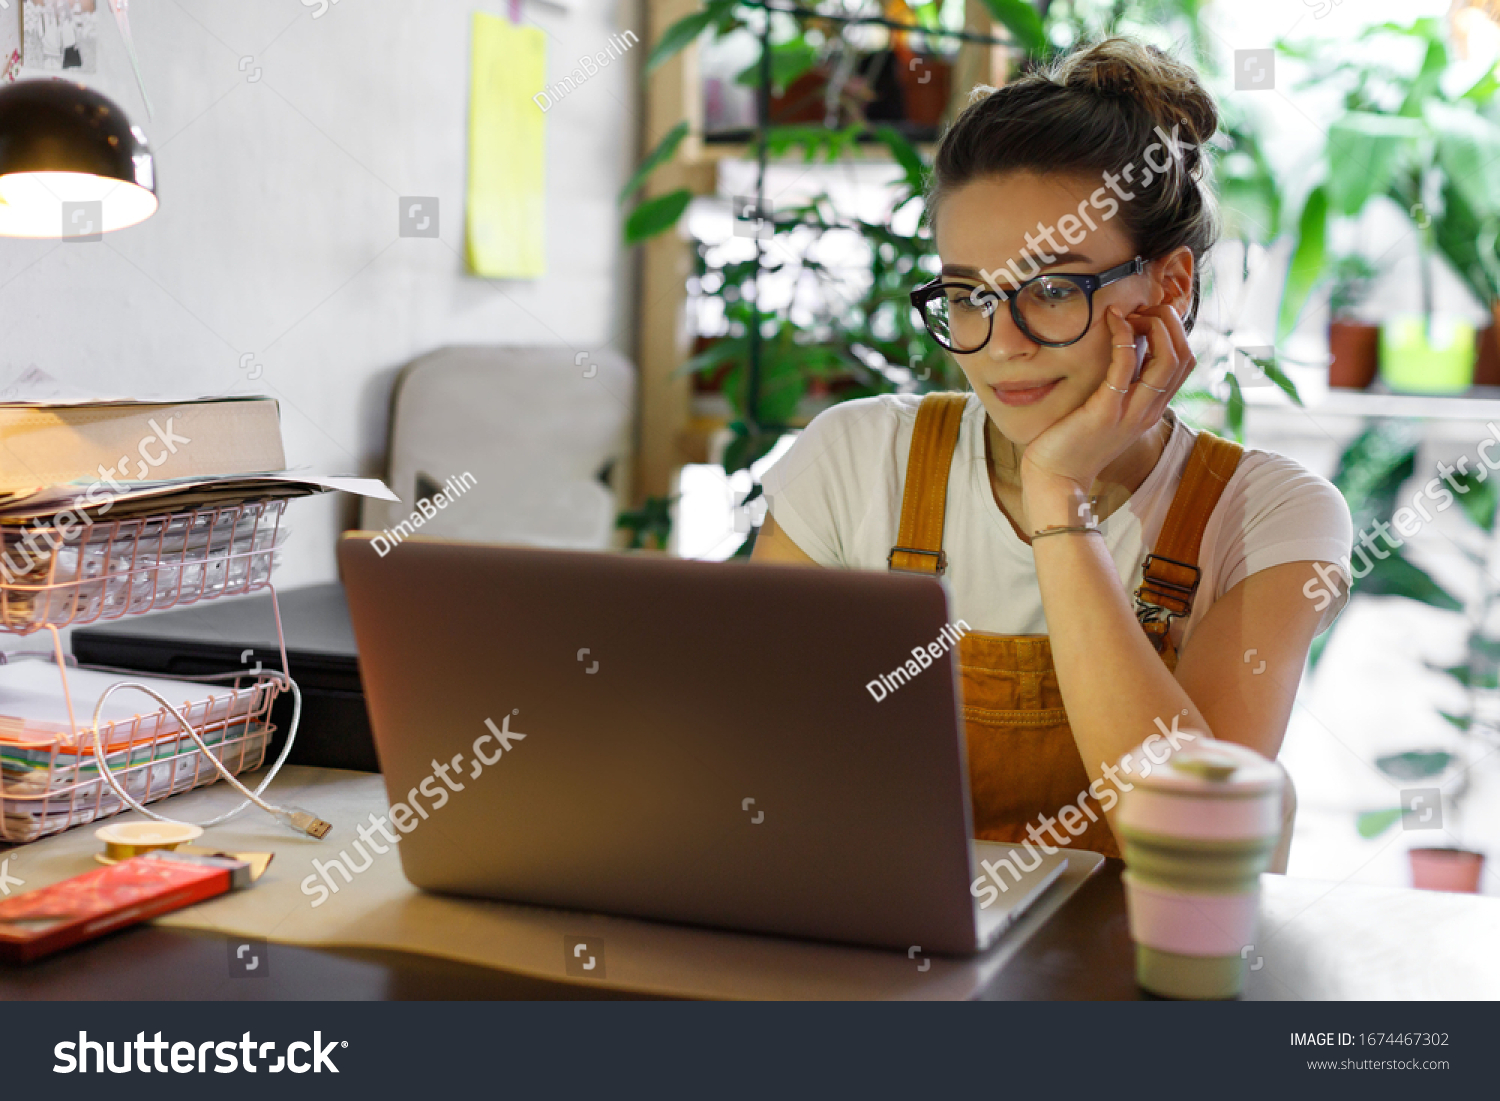 Young female gardener in glasses using laptop, communicates on internet with customer in home garden/greenhouse, reusable coffee/tea mug on table.Cozy office workplace, remote work, E learning concept #1674467302